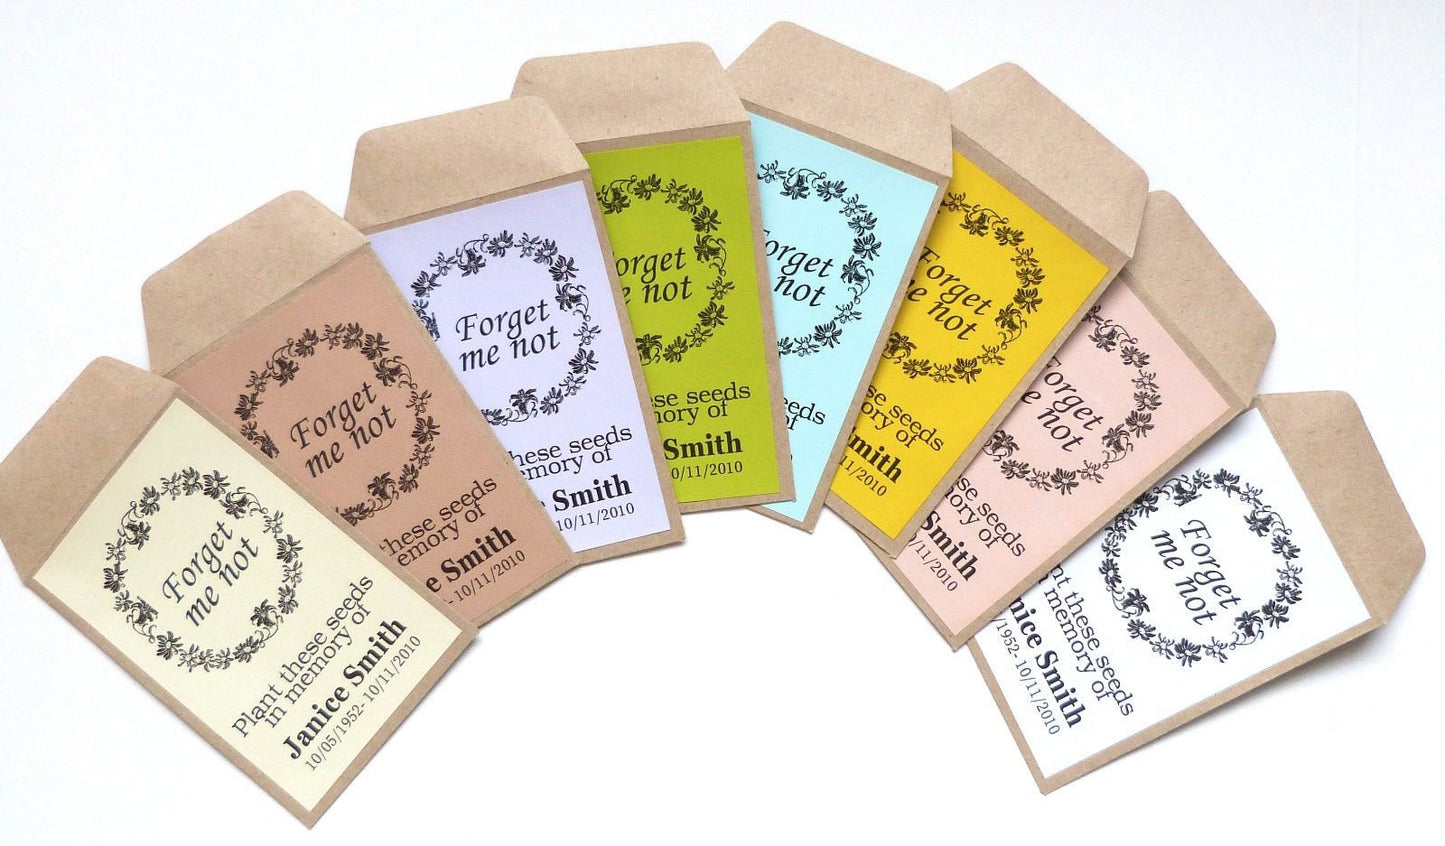 100 x funeral seed packets- forget me not personalised envelopes and stickers